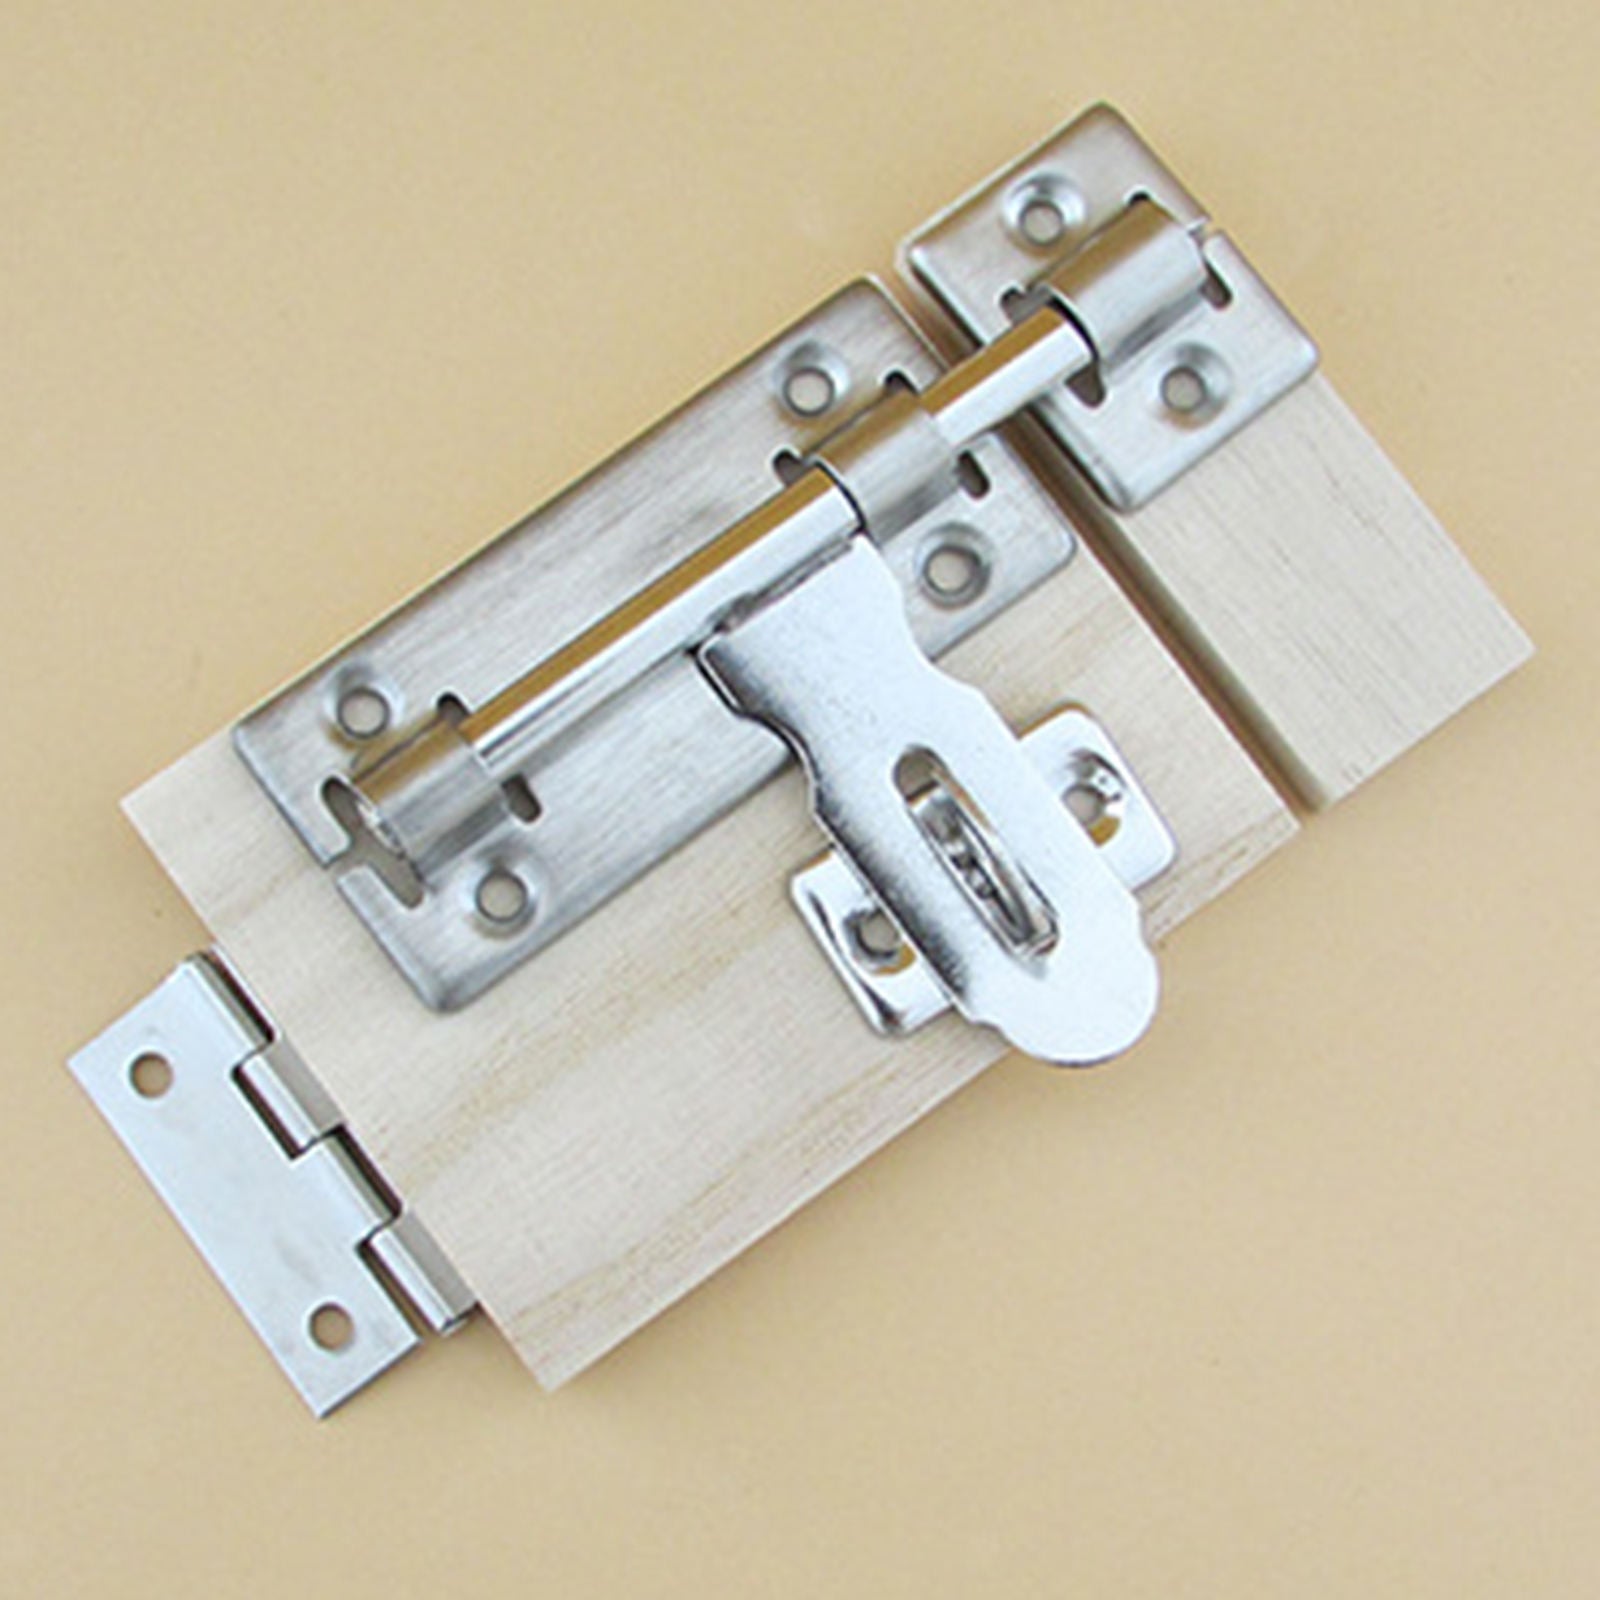 Busy Board Door Lock Toys Designed Motor Gifts For